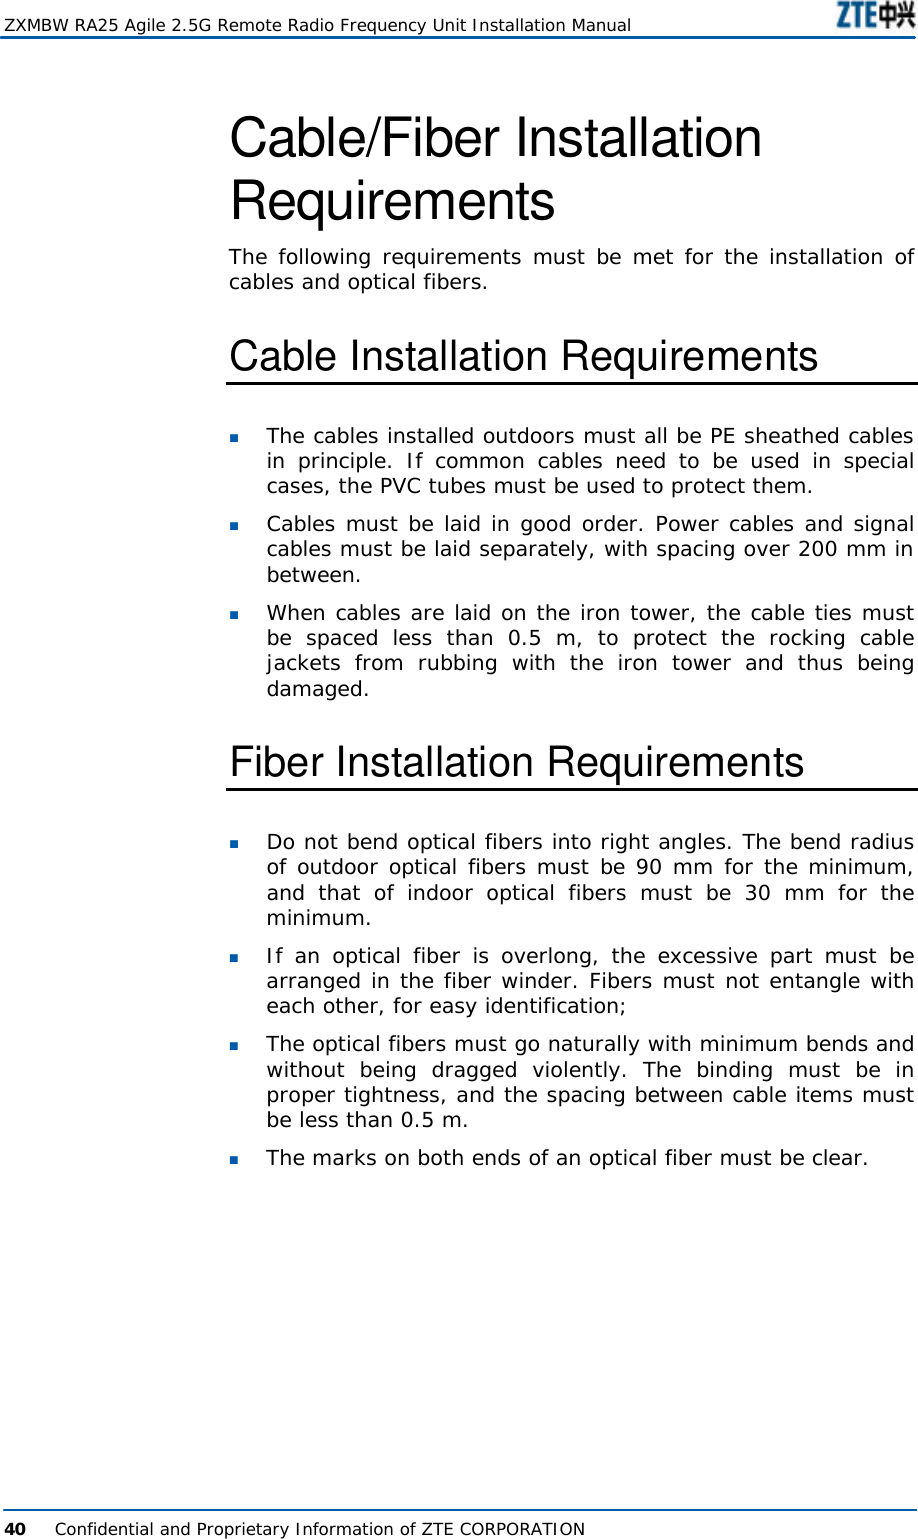  ZXMBW RA25 Agile 2.5G Remote Radio Frequency Unit Installation Manual  40      Confidential and Proprietary Information of ZTE CORPORATION  Cable/Fiber Installation Requirements The following requirements must be met for the installation of cables and optical fibers.  Cable Installation Requirements n The cables installed outdoors must all be PE sheathed cables in principle. If common cables need to be used in special cases, the PVC tubes must be used to protect them.  n Cables must be laid in good order. Power cables and signal cables must be laid separately, with spacing over 200 mm in between.  n When cables are laid on the iron tower, the cable ties must be spaced less than 0.5 m, to protect the rocking cable jackets from rubbing with the iron tower and thus being damaged.  Fiber Installation Requirements n Do not bend optical fibers into right angles. The bend radius of outdoor optical fibers must be 90 mm for the minimum, and that of indoor optical fibers must be 30 mm for the minimum.  n If an optical fiber is overlong, the excessive part must be arranged in the fiber winder. Fibers must not entangle with each other, for easy identification;  n The optical fibers must go naturally with minimum bends and without being dragged violently. The binding must be in proper tightness, and the spacing between cable items must be less than 0.5 m.  n The marks on both ends of an optical fiber must be clear.   